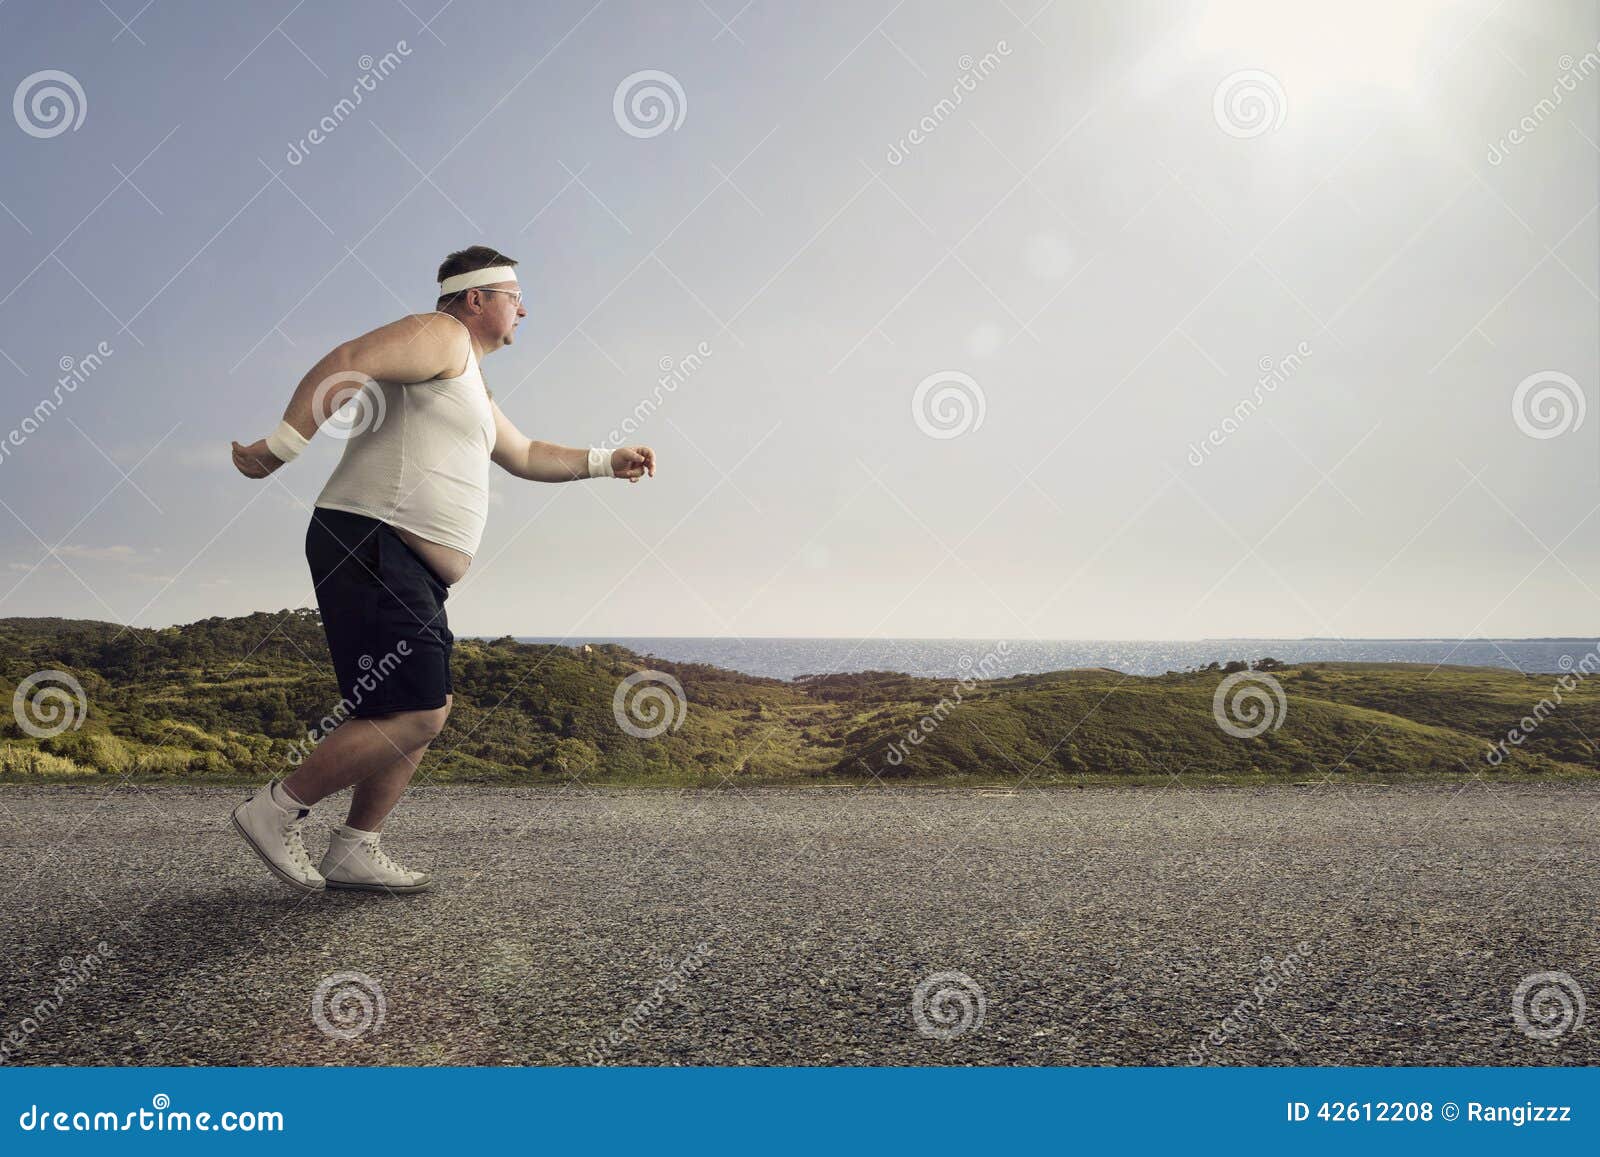 1,580 Funny Jogging Stock Photos - Free & Royalty-Free Stock Photos from  Dreamstime